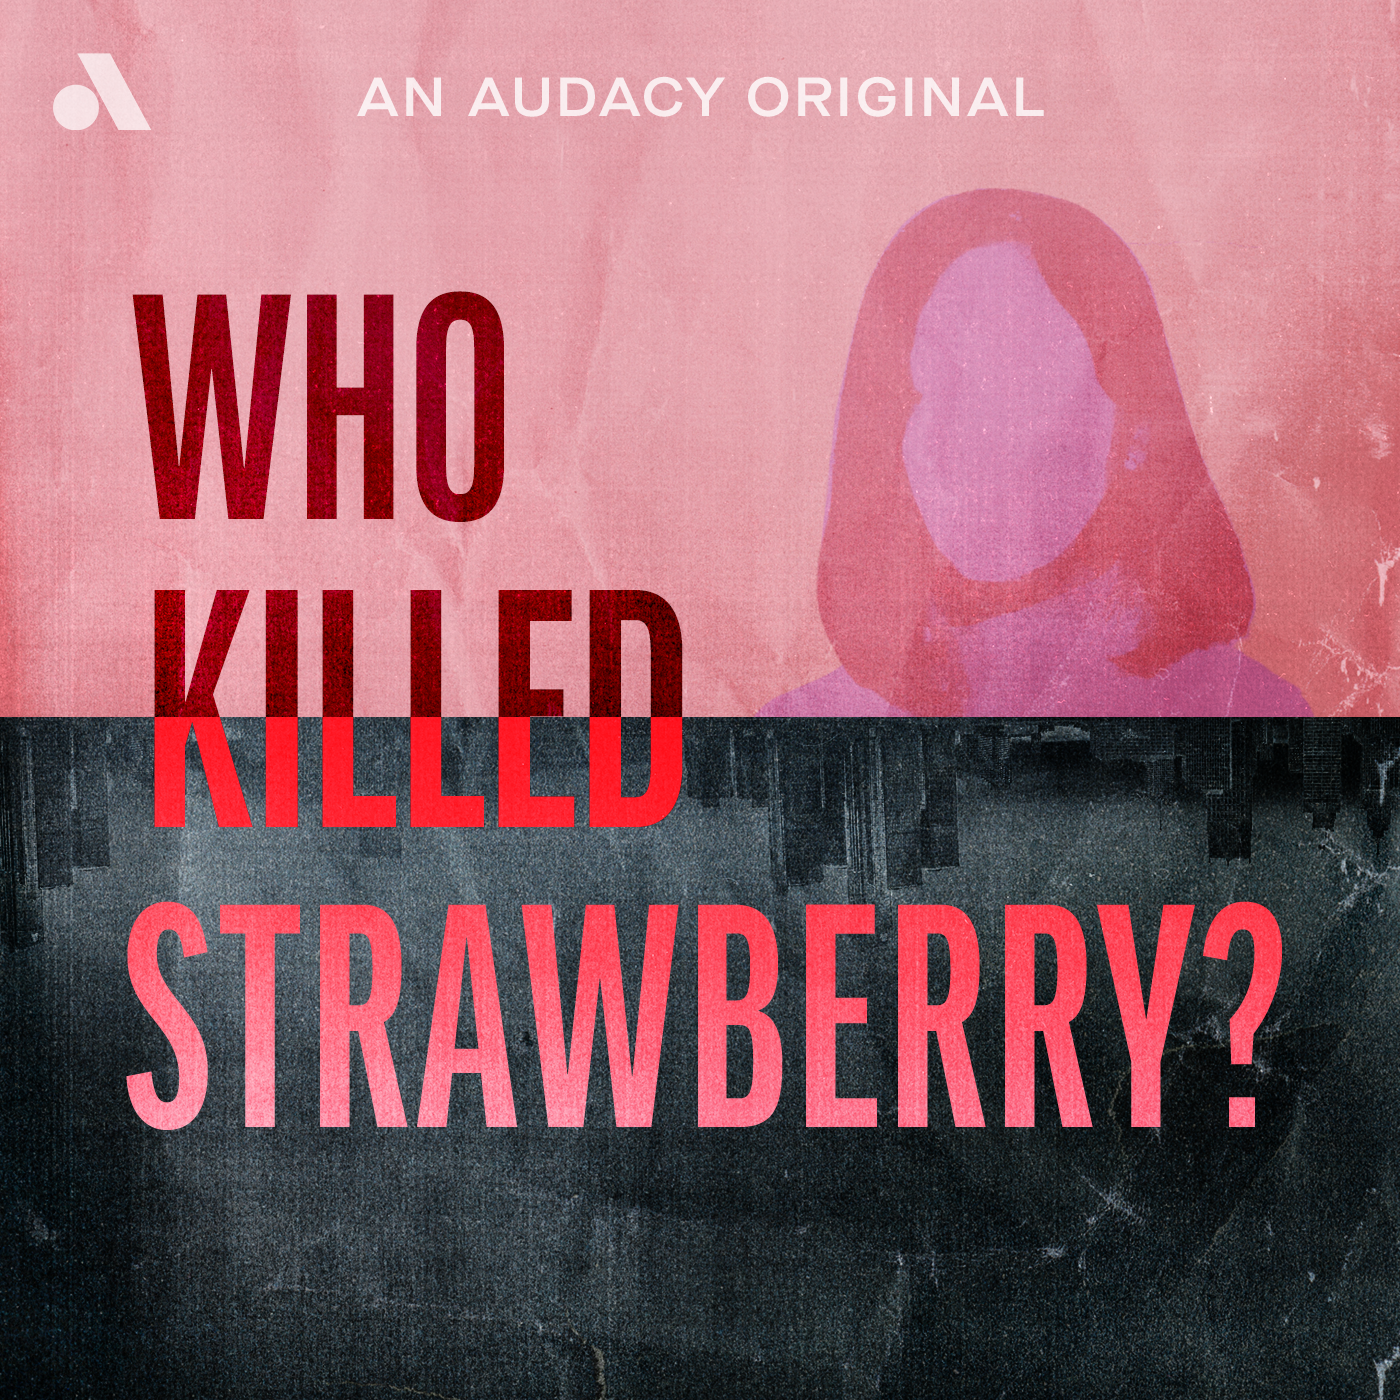 Who Killed Strawberry: The Trailer